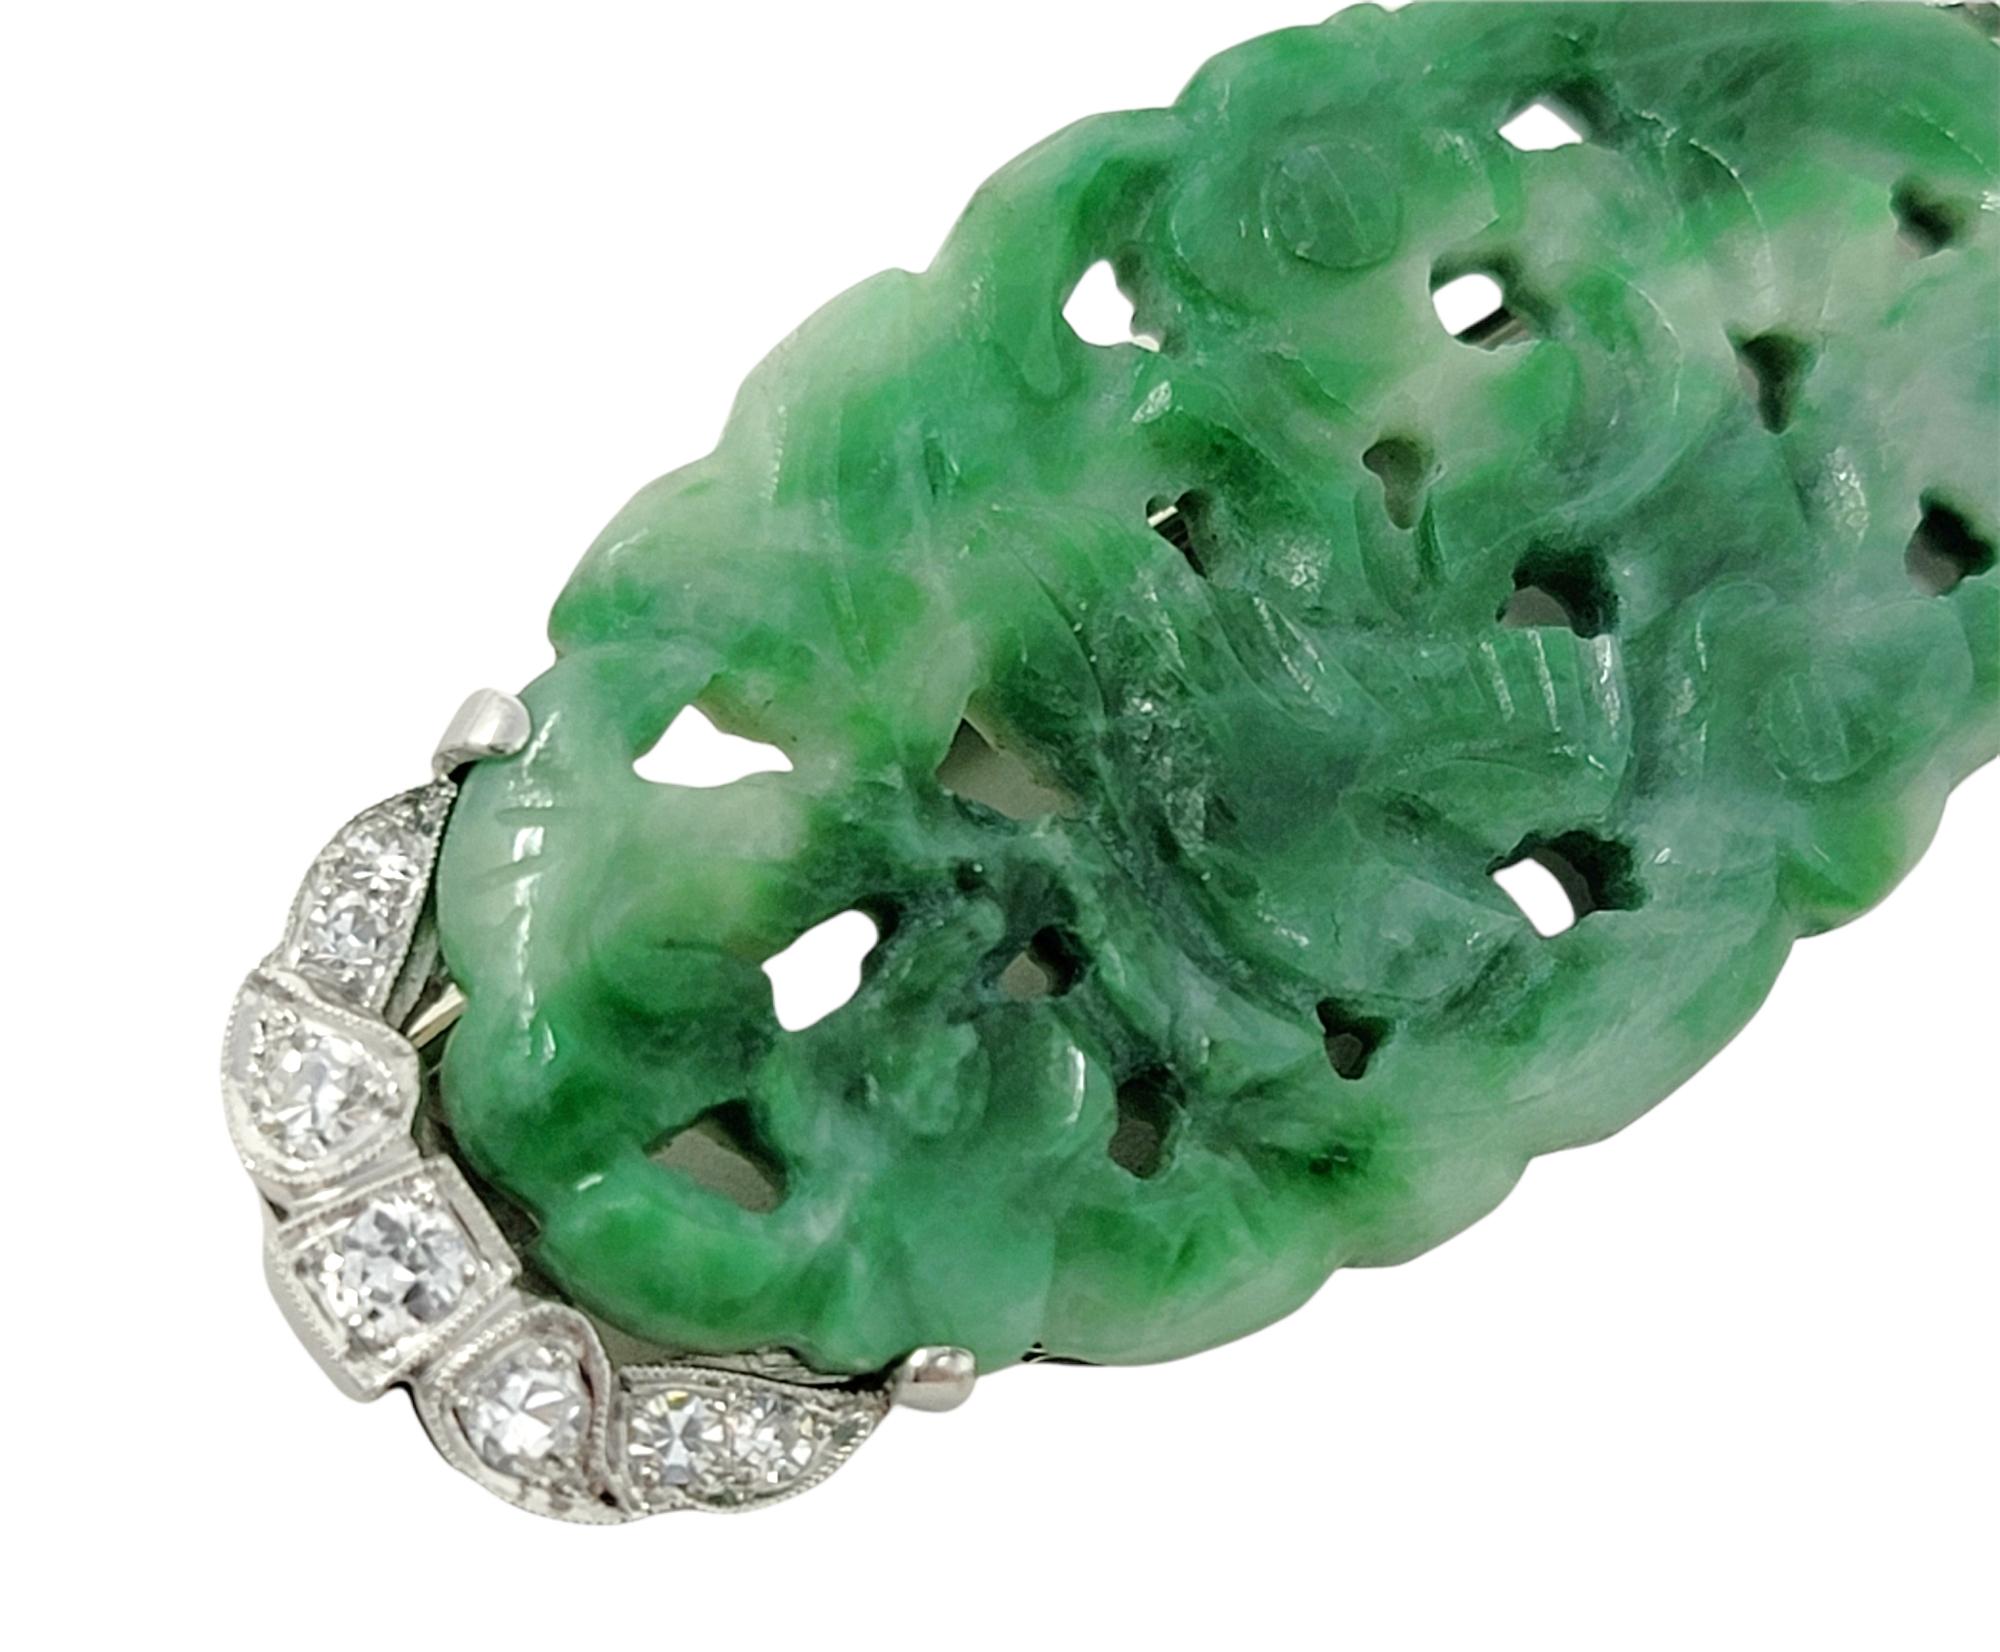 Gorgeous, intricately carved jadeite brooch with dazzling diamond accents offers bold color, unique style and undeniable glamour.

Metal: 14K White Gold
Weight: 8.5 grams
Natural Diamonds: .27 carat total weight
Diamond cuts: Round and